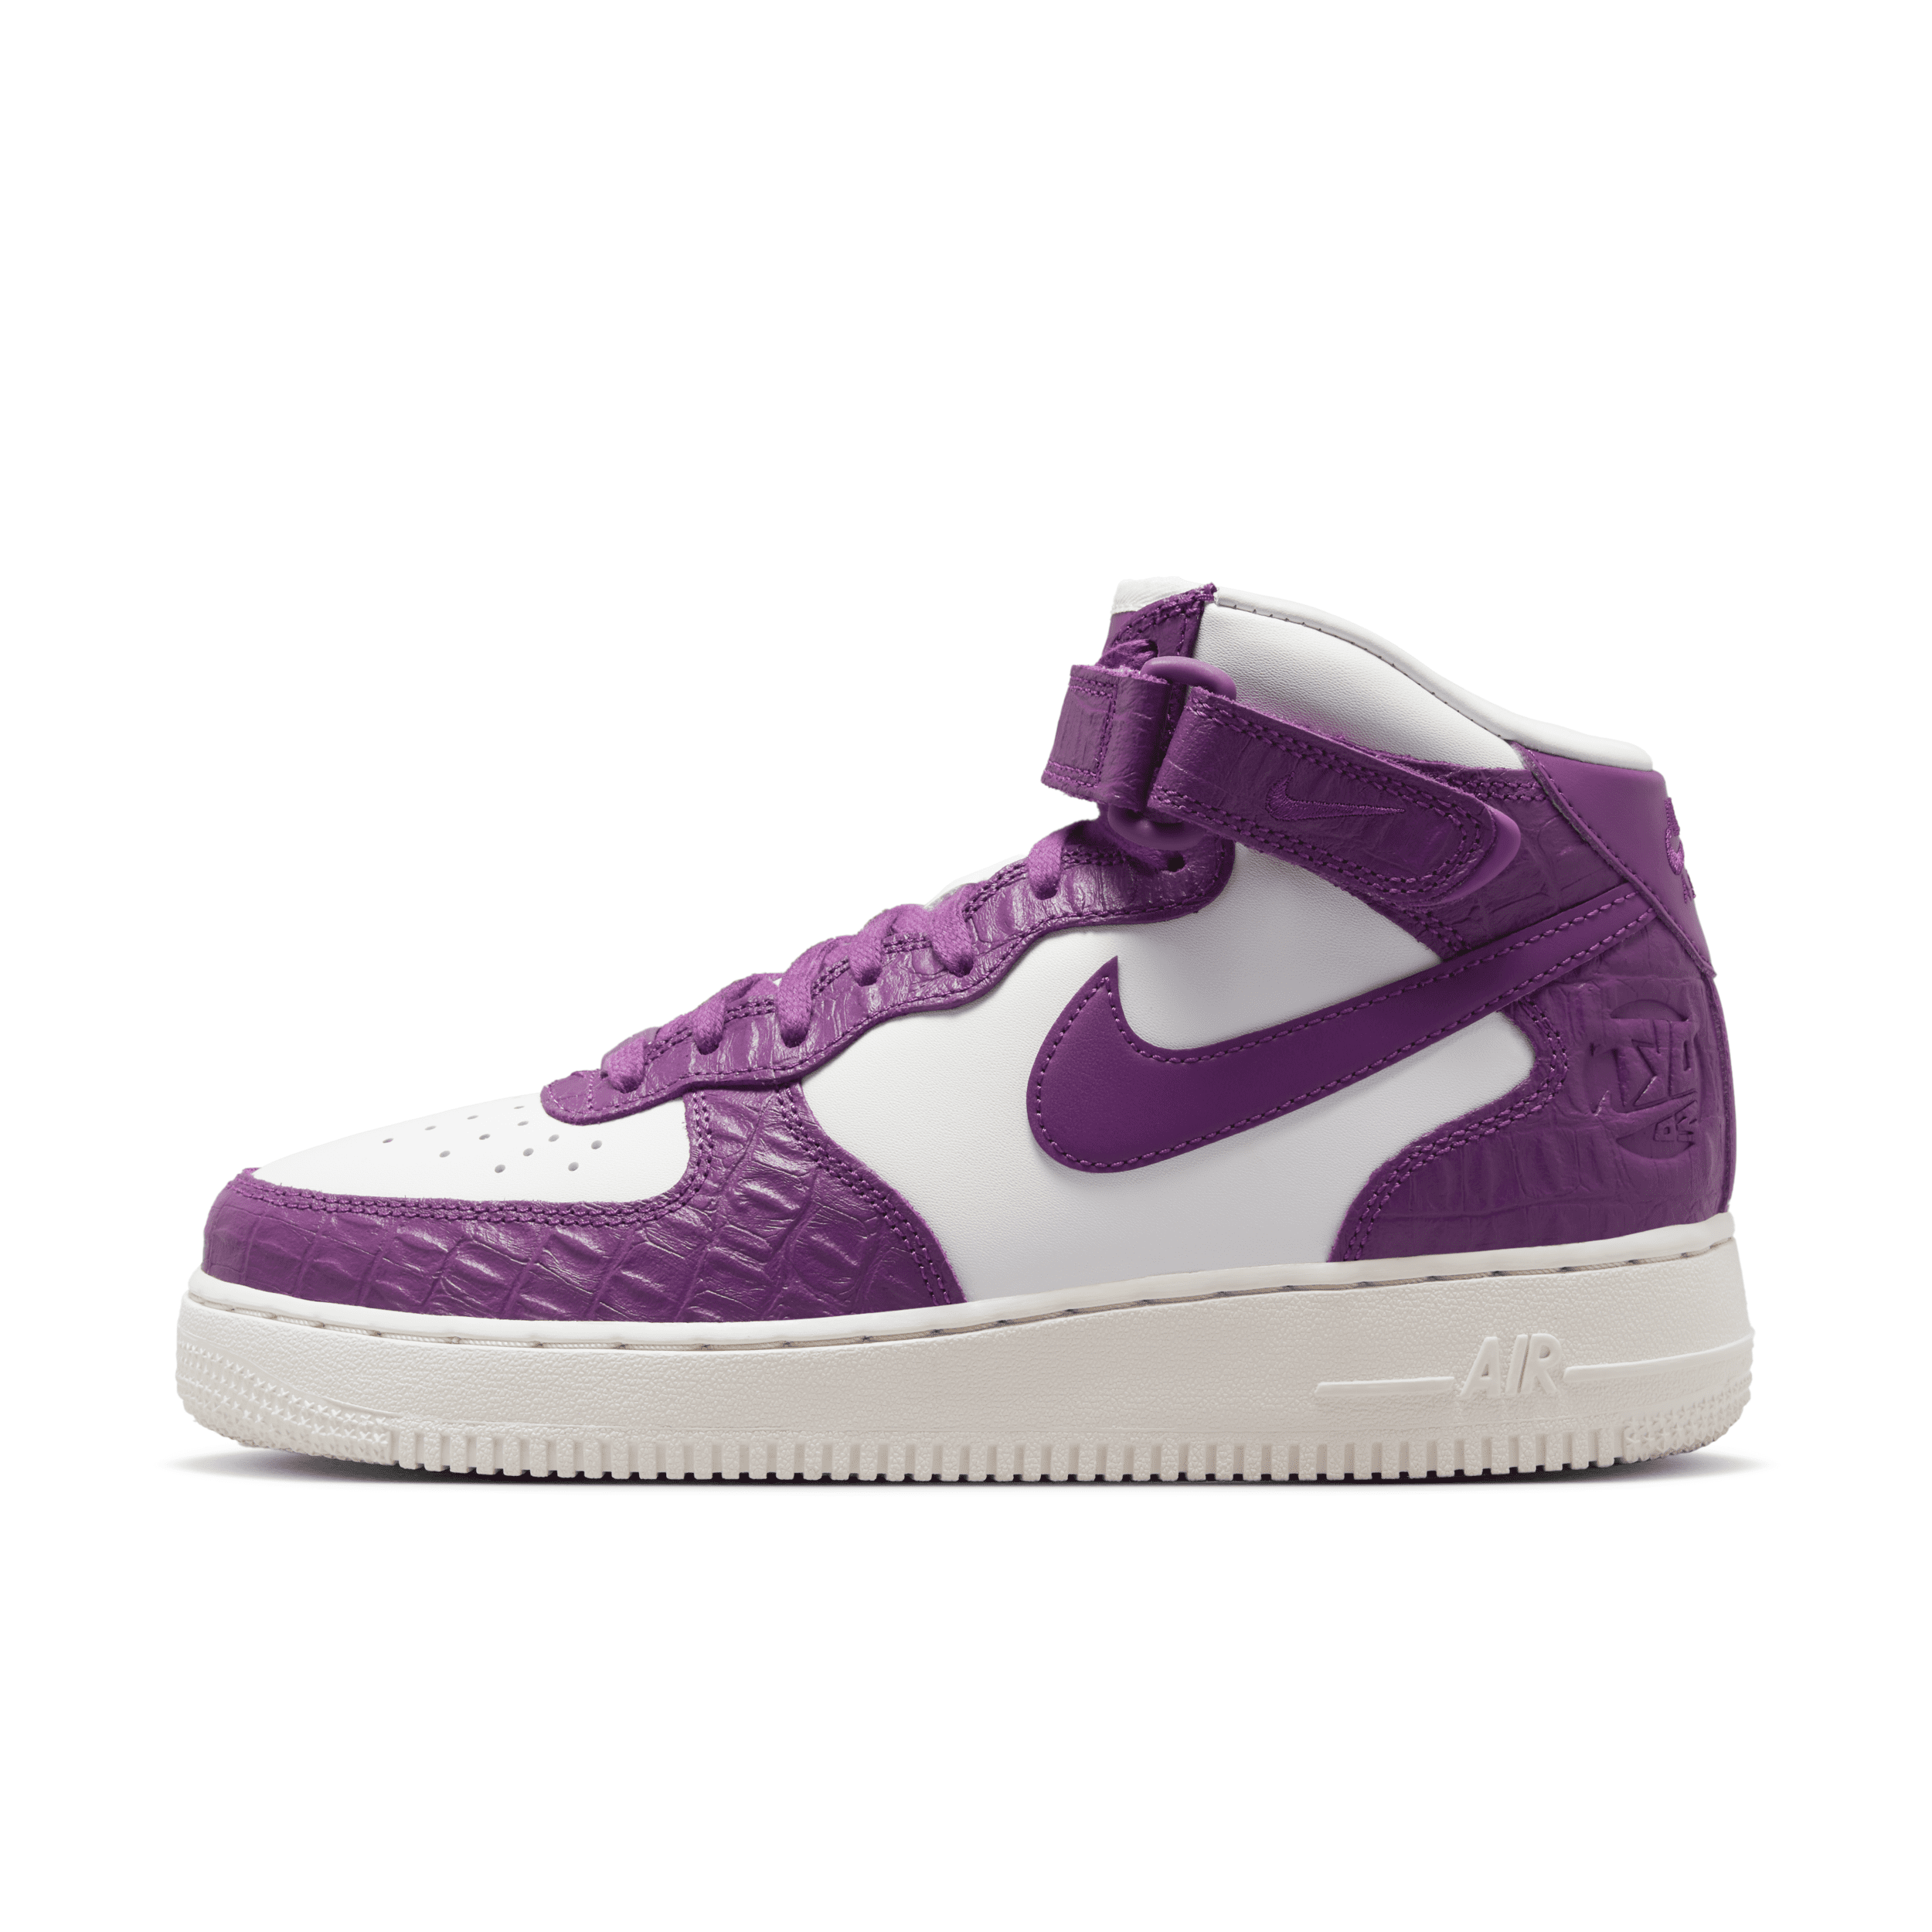 NIKE WOMEN'S AIR FORCE 1 '07 MID LX SHOES,14256881